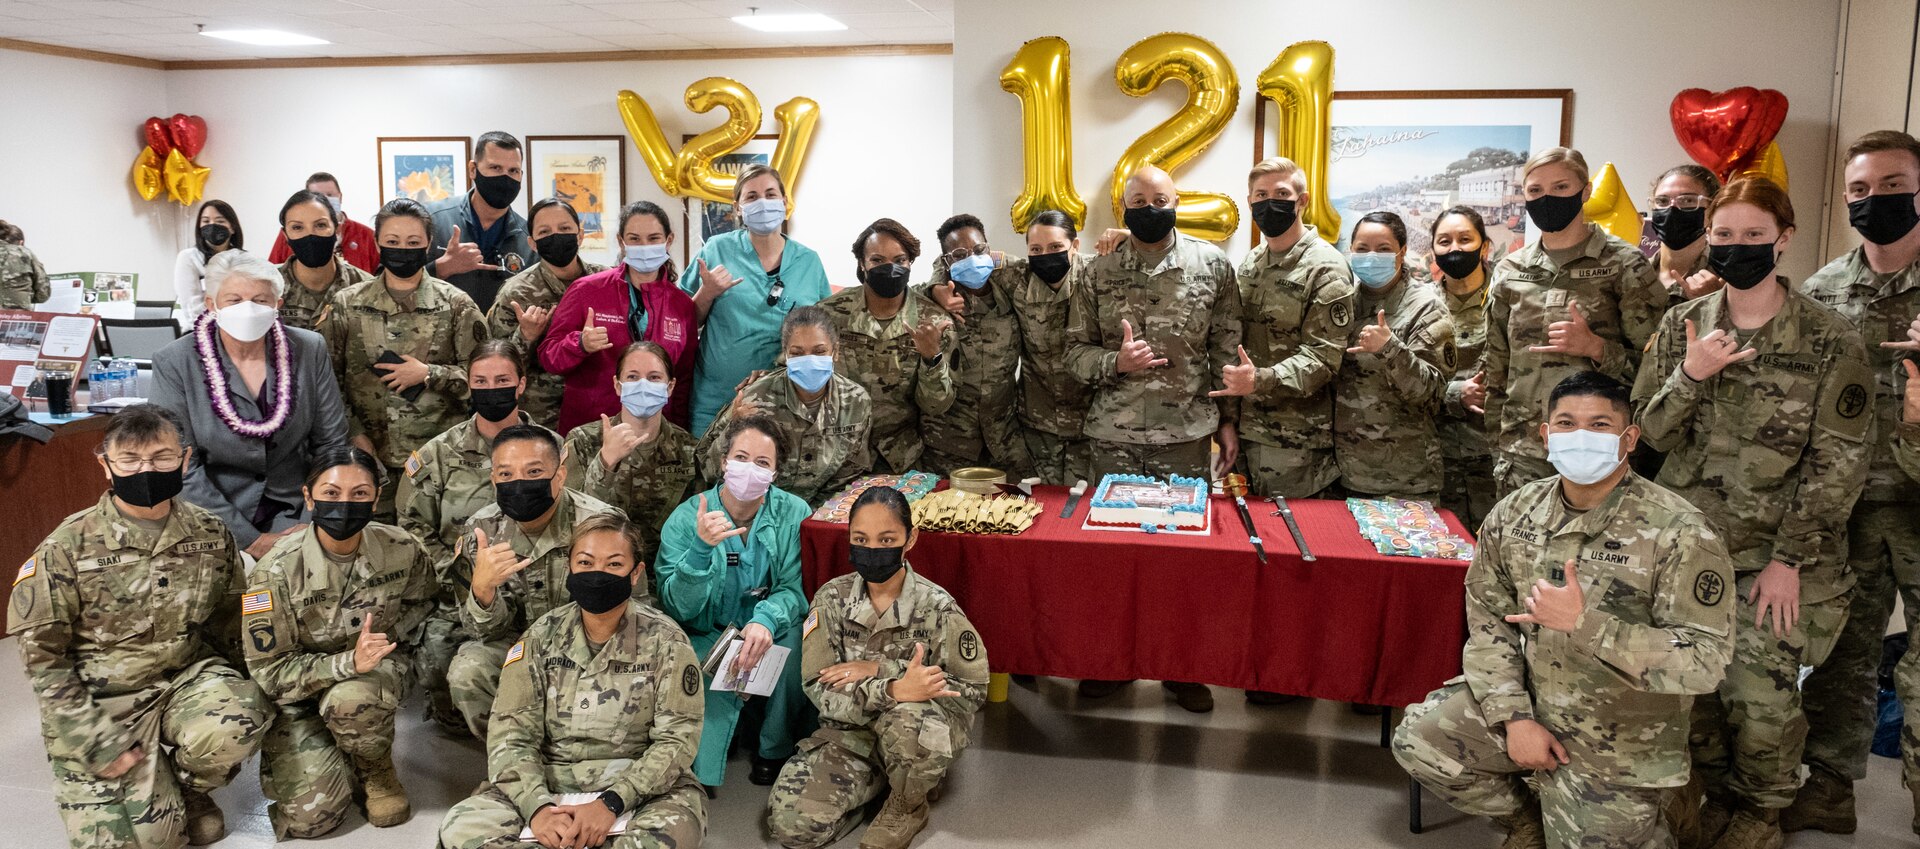 Tripler Army Medical Center celebrated the 121st ANC Birthday with guest speaker Col. (Ret) Teresa Parson, followed by a cake cutting ceremony in the Executive dining hall. Thank you to all nurses.